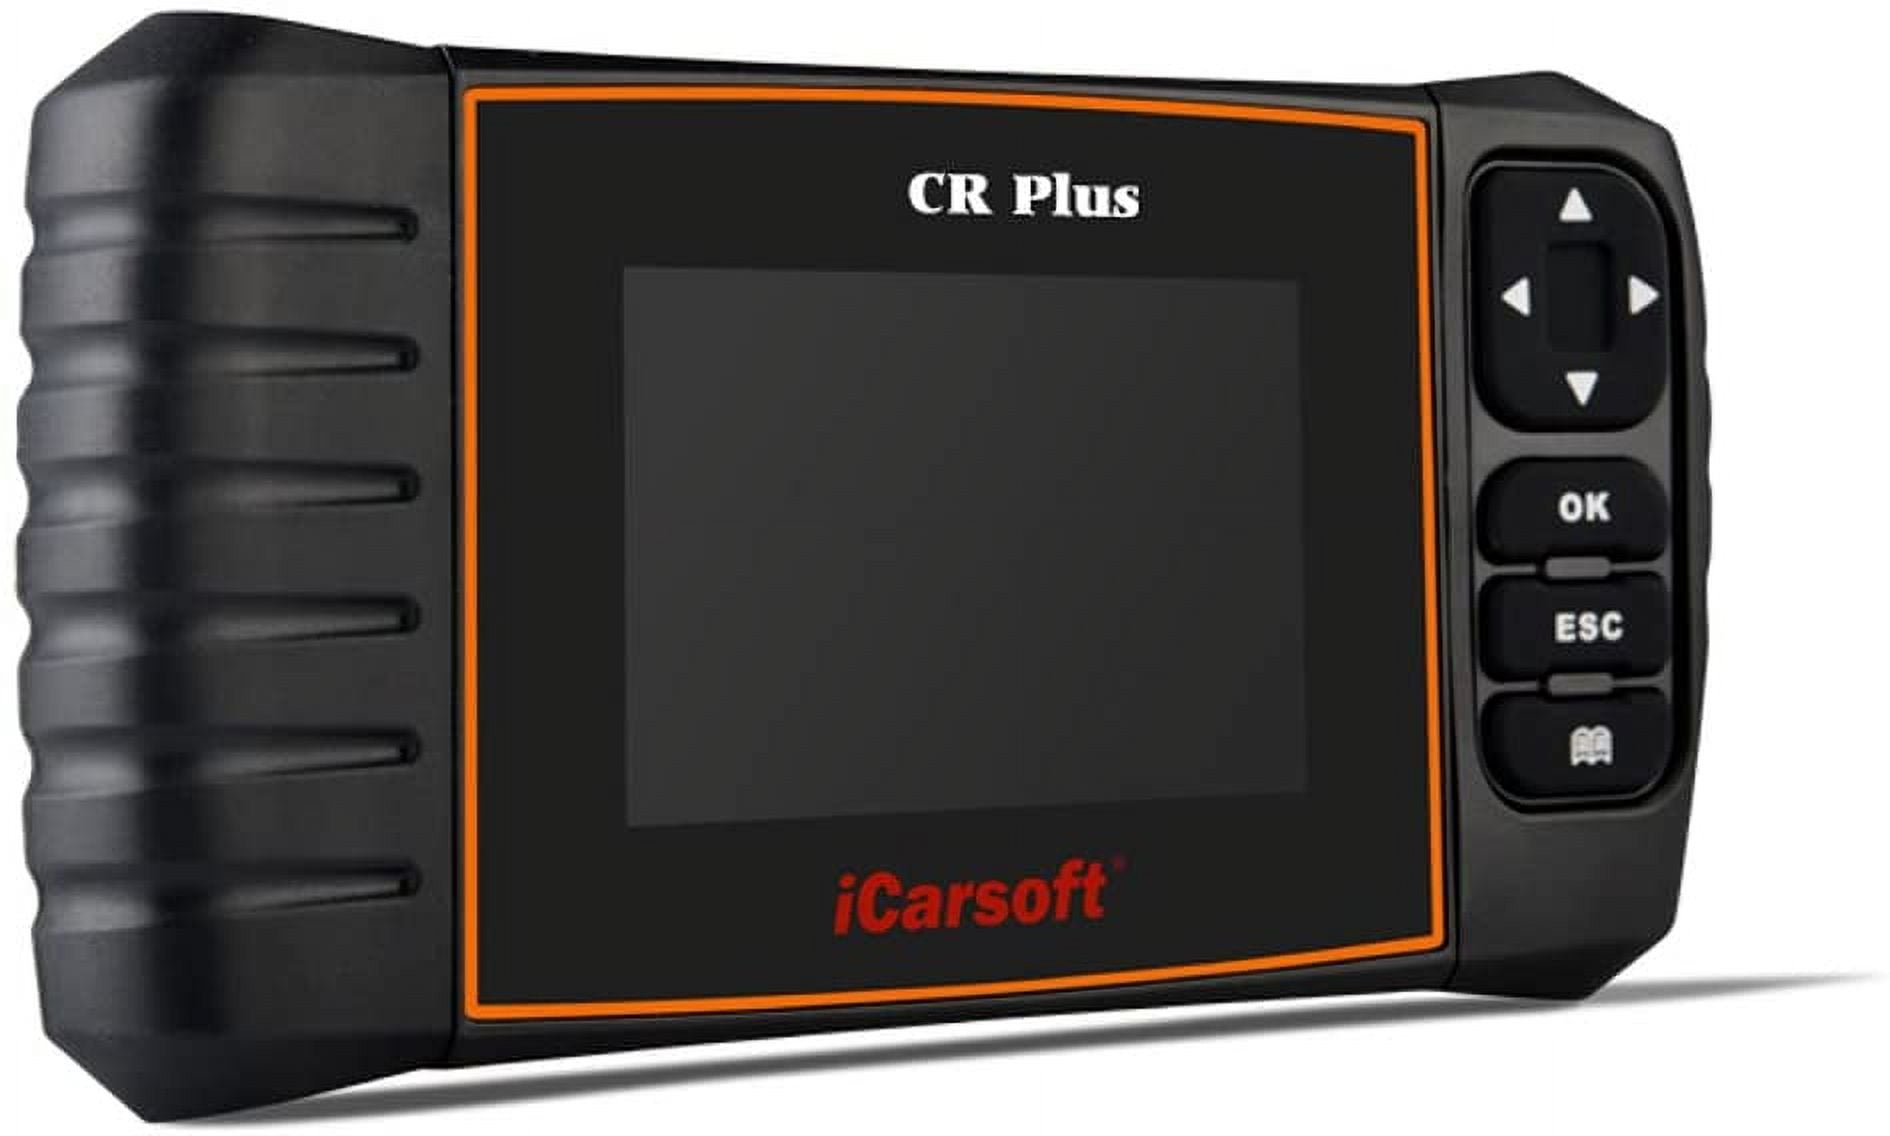 Scanners - iCarsoft CR MAX BT Professional and Powerful Vehicle Diagnosis  Tool was listed for R8,999.00 on 14 Mar at 16:16 by Bargain stuff in  Springs (ID:579858602)